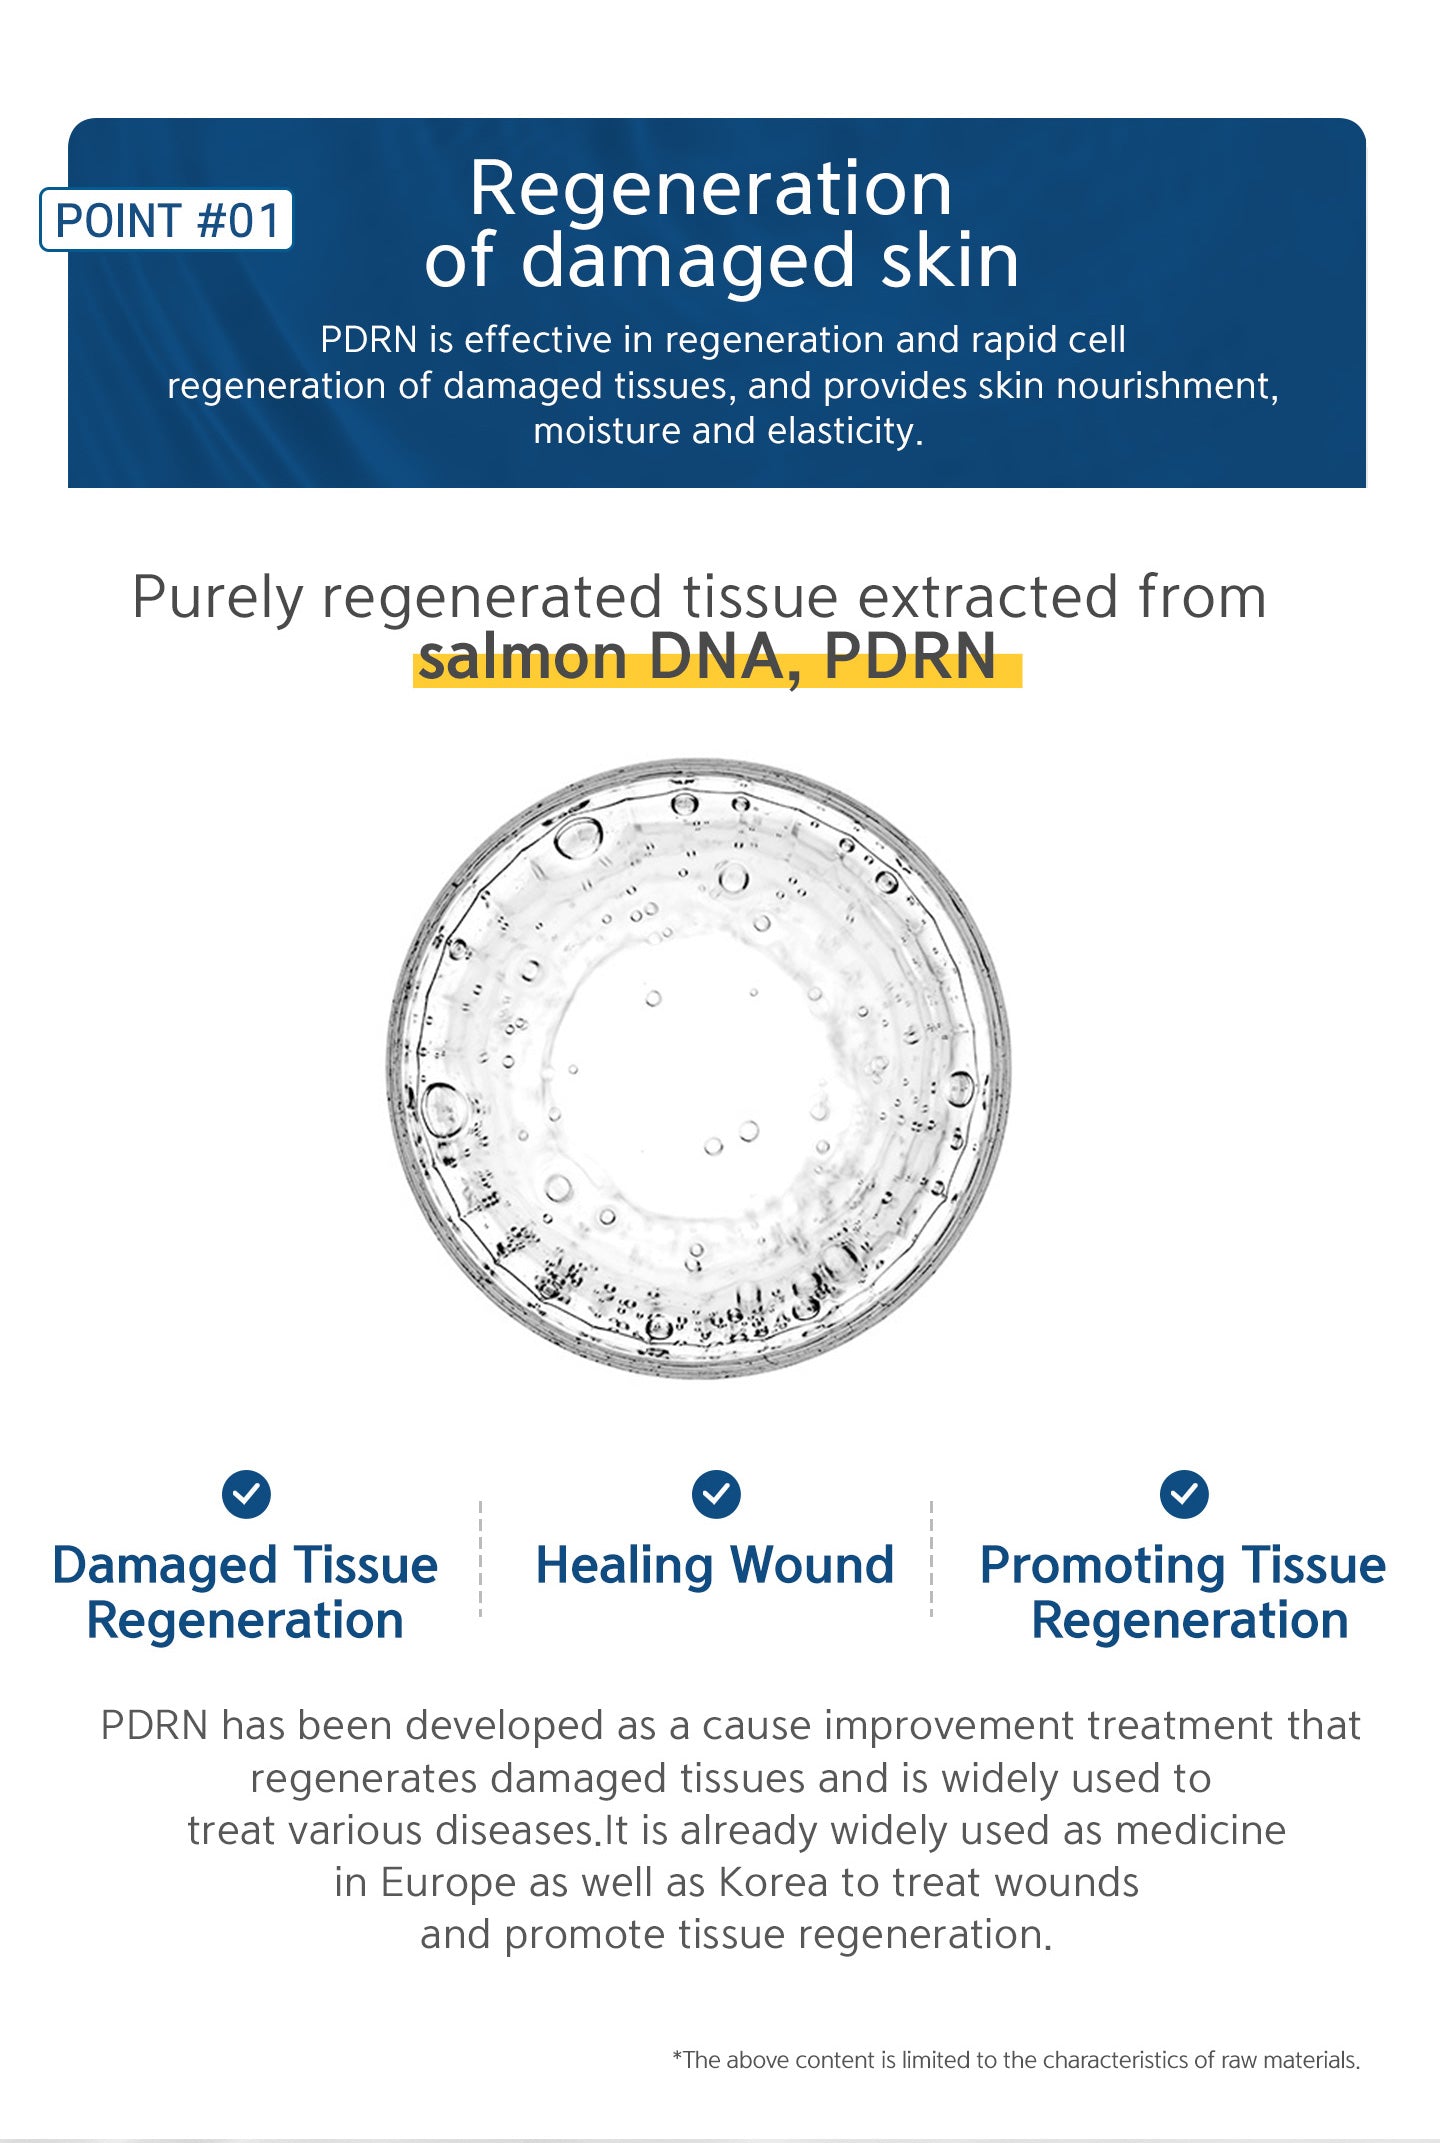 Purely regenerated tissue extracted from salmon DNA, PDRN. Damaged tissue regeneration, healing wound, promoting tissue regeneration. 